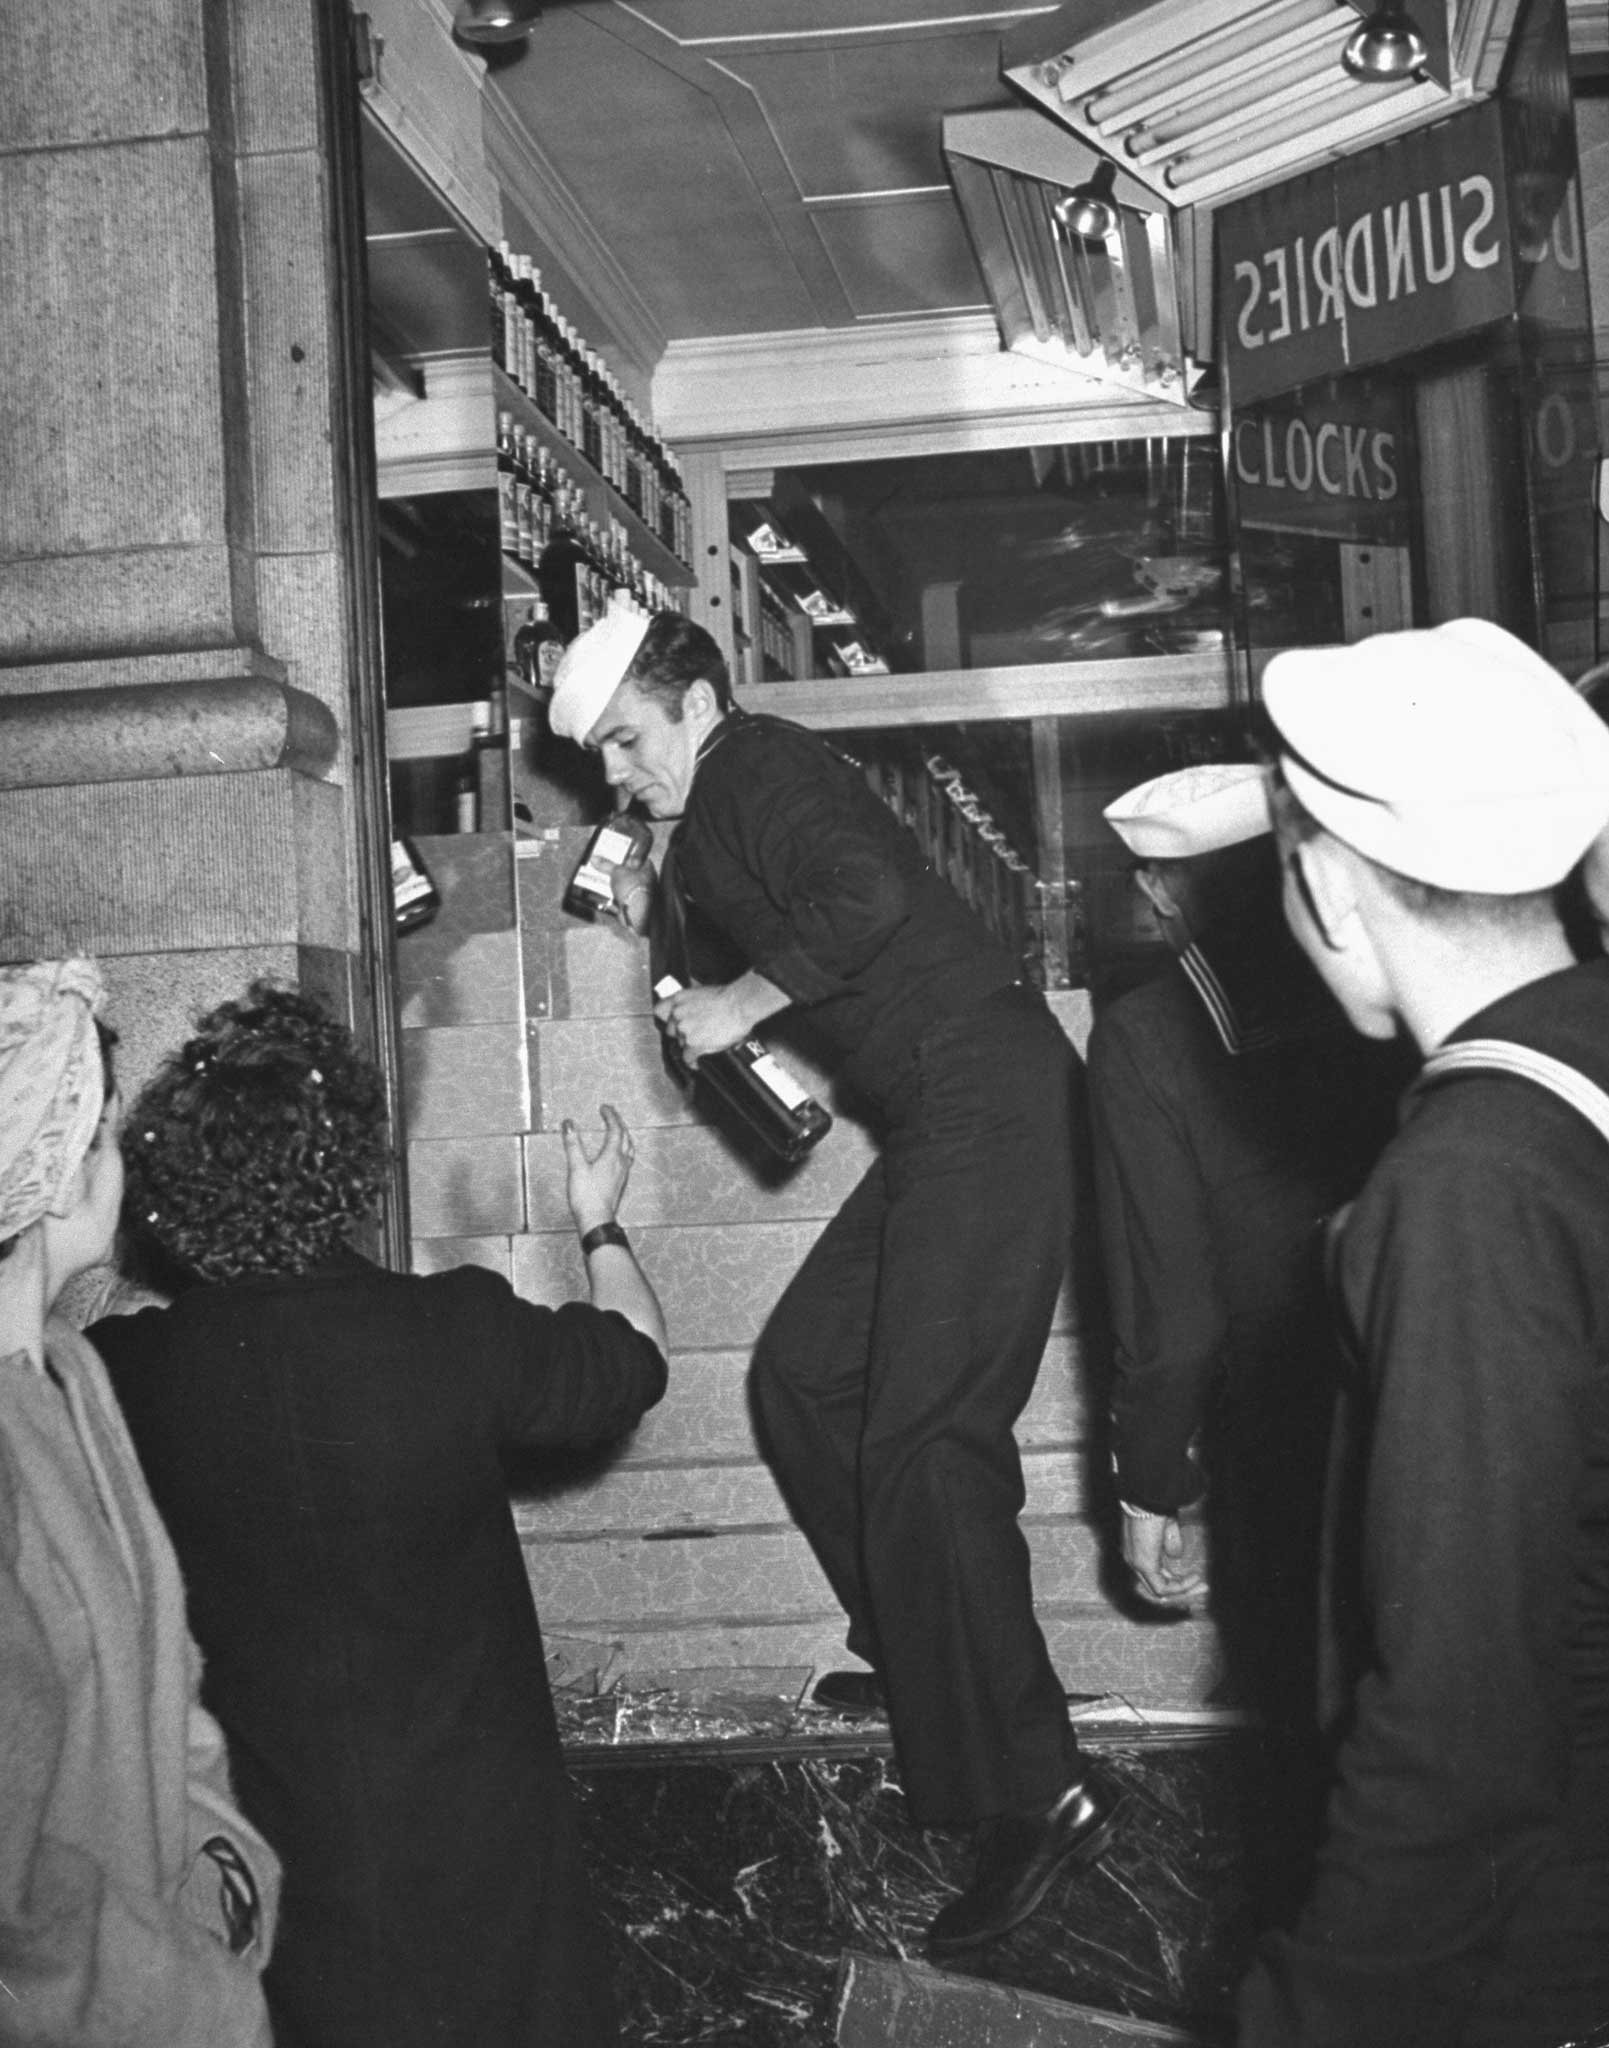 "In San Francisco sailors break into a liquor store and pilfer the stock. Revel turned into a riot as tense servicemen, reprieved from impending Pacific war-zone duty, defaced statues, over-turned street cars, ripped down bond booths, attacked girls. The toll: 1,000 casualties."